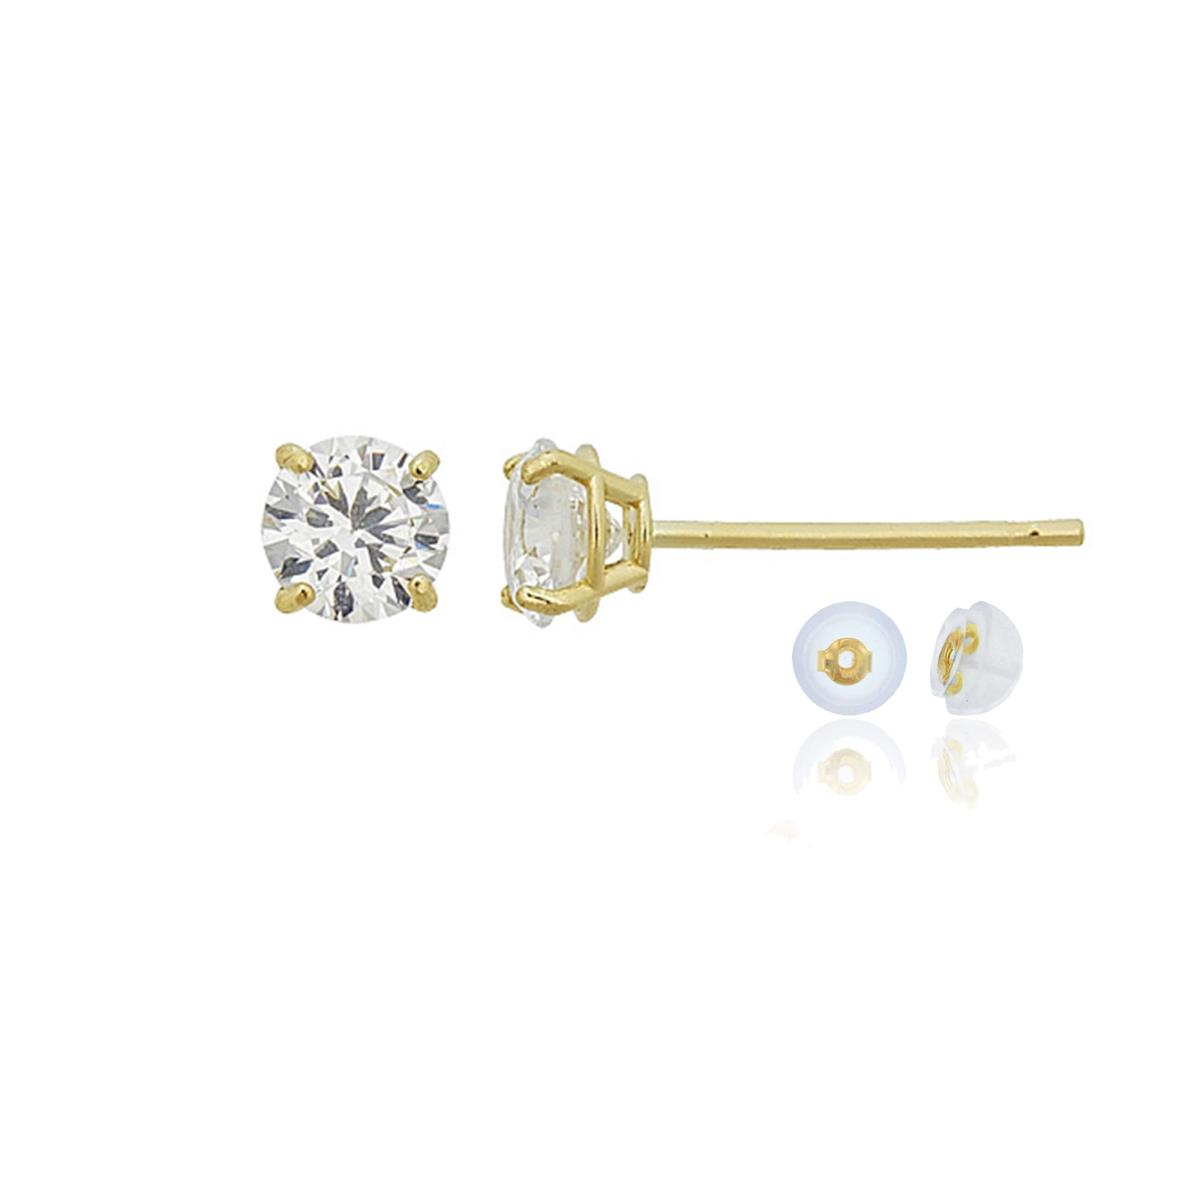 10K Yellow Gold 4mm Rd White Swarovski Zirconia 4-Prong Cast Basket Solitaire Earring & Silicone Bubble Back